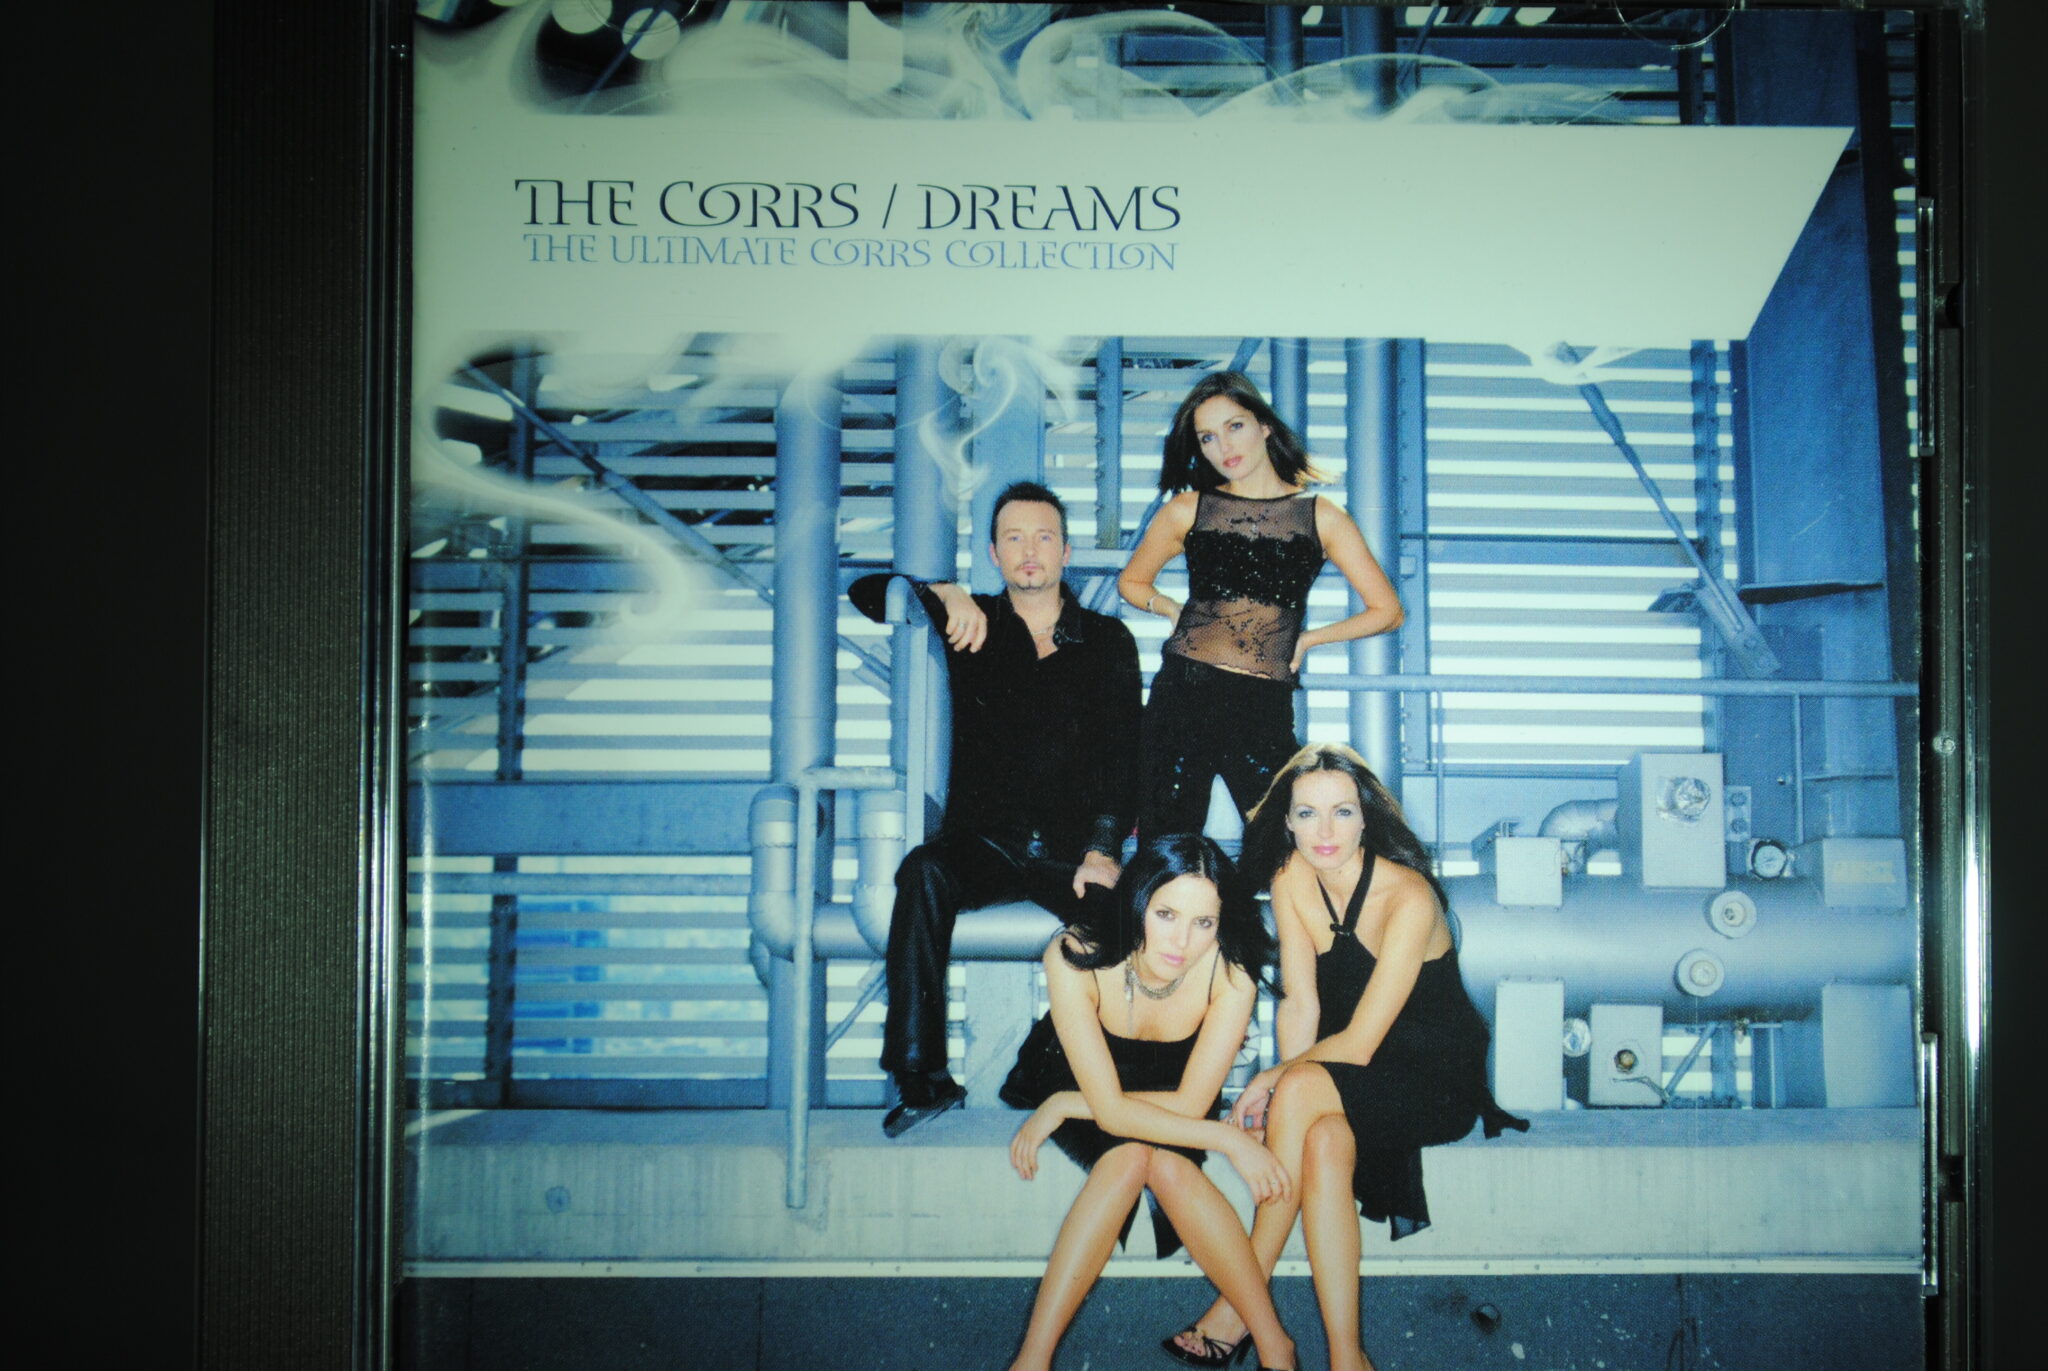 the corrs dreams flac in torrent